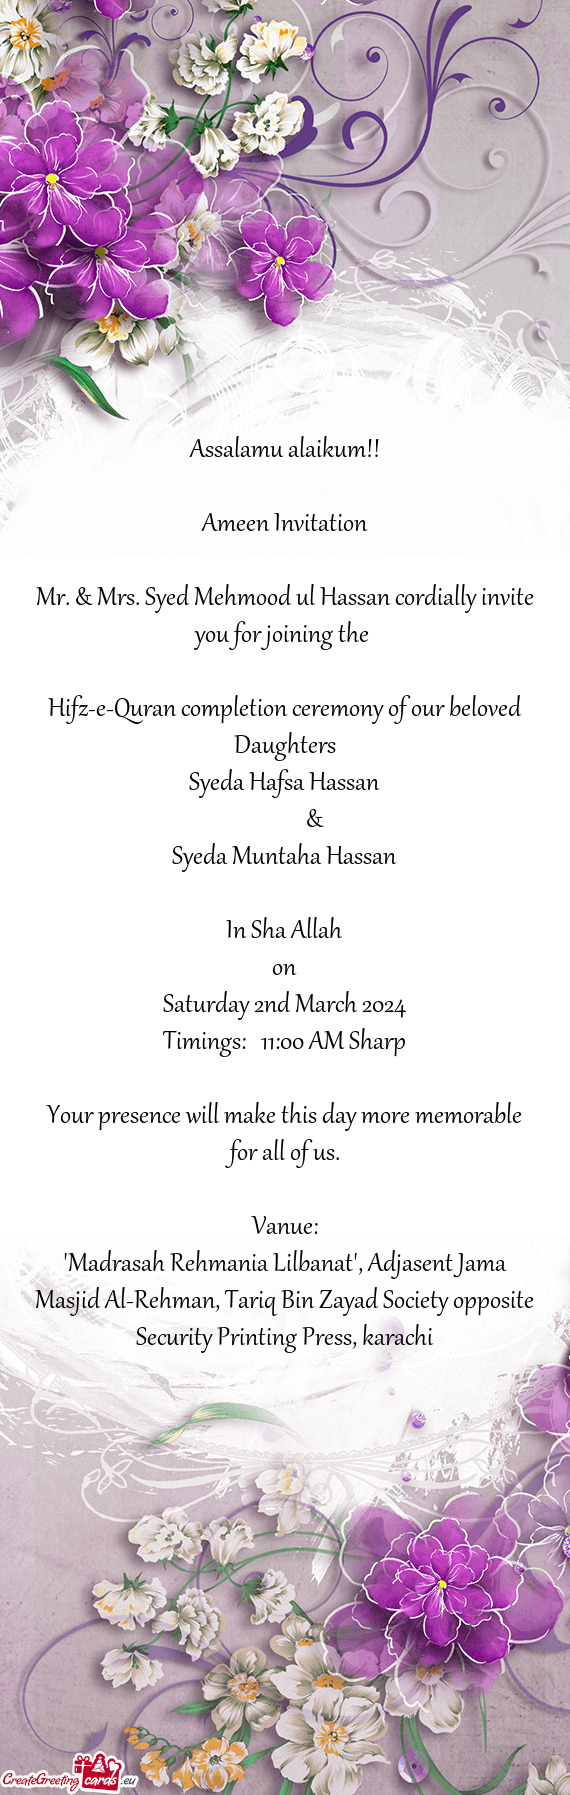 Mr. & Mrs. Syed Mehmood ul Hassan cordially invite you for joining the